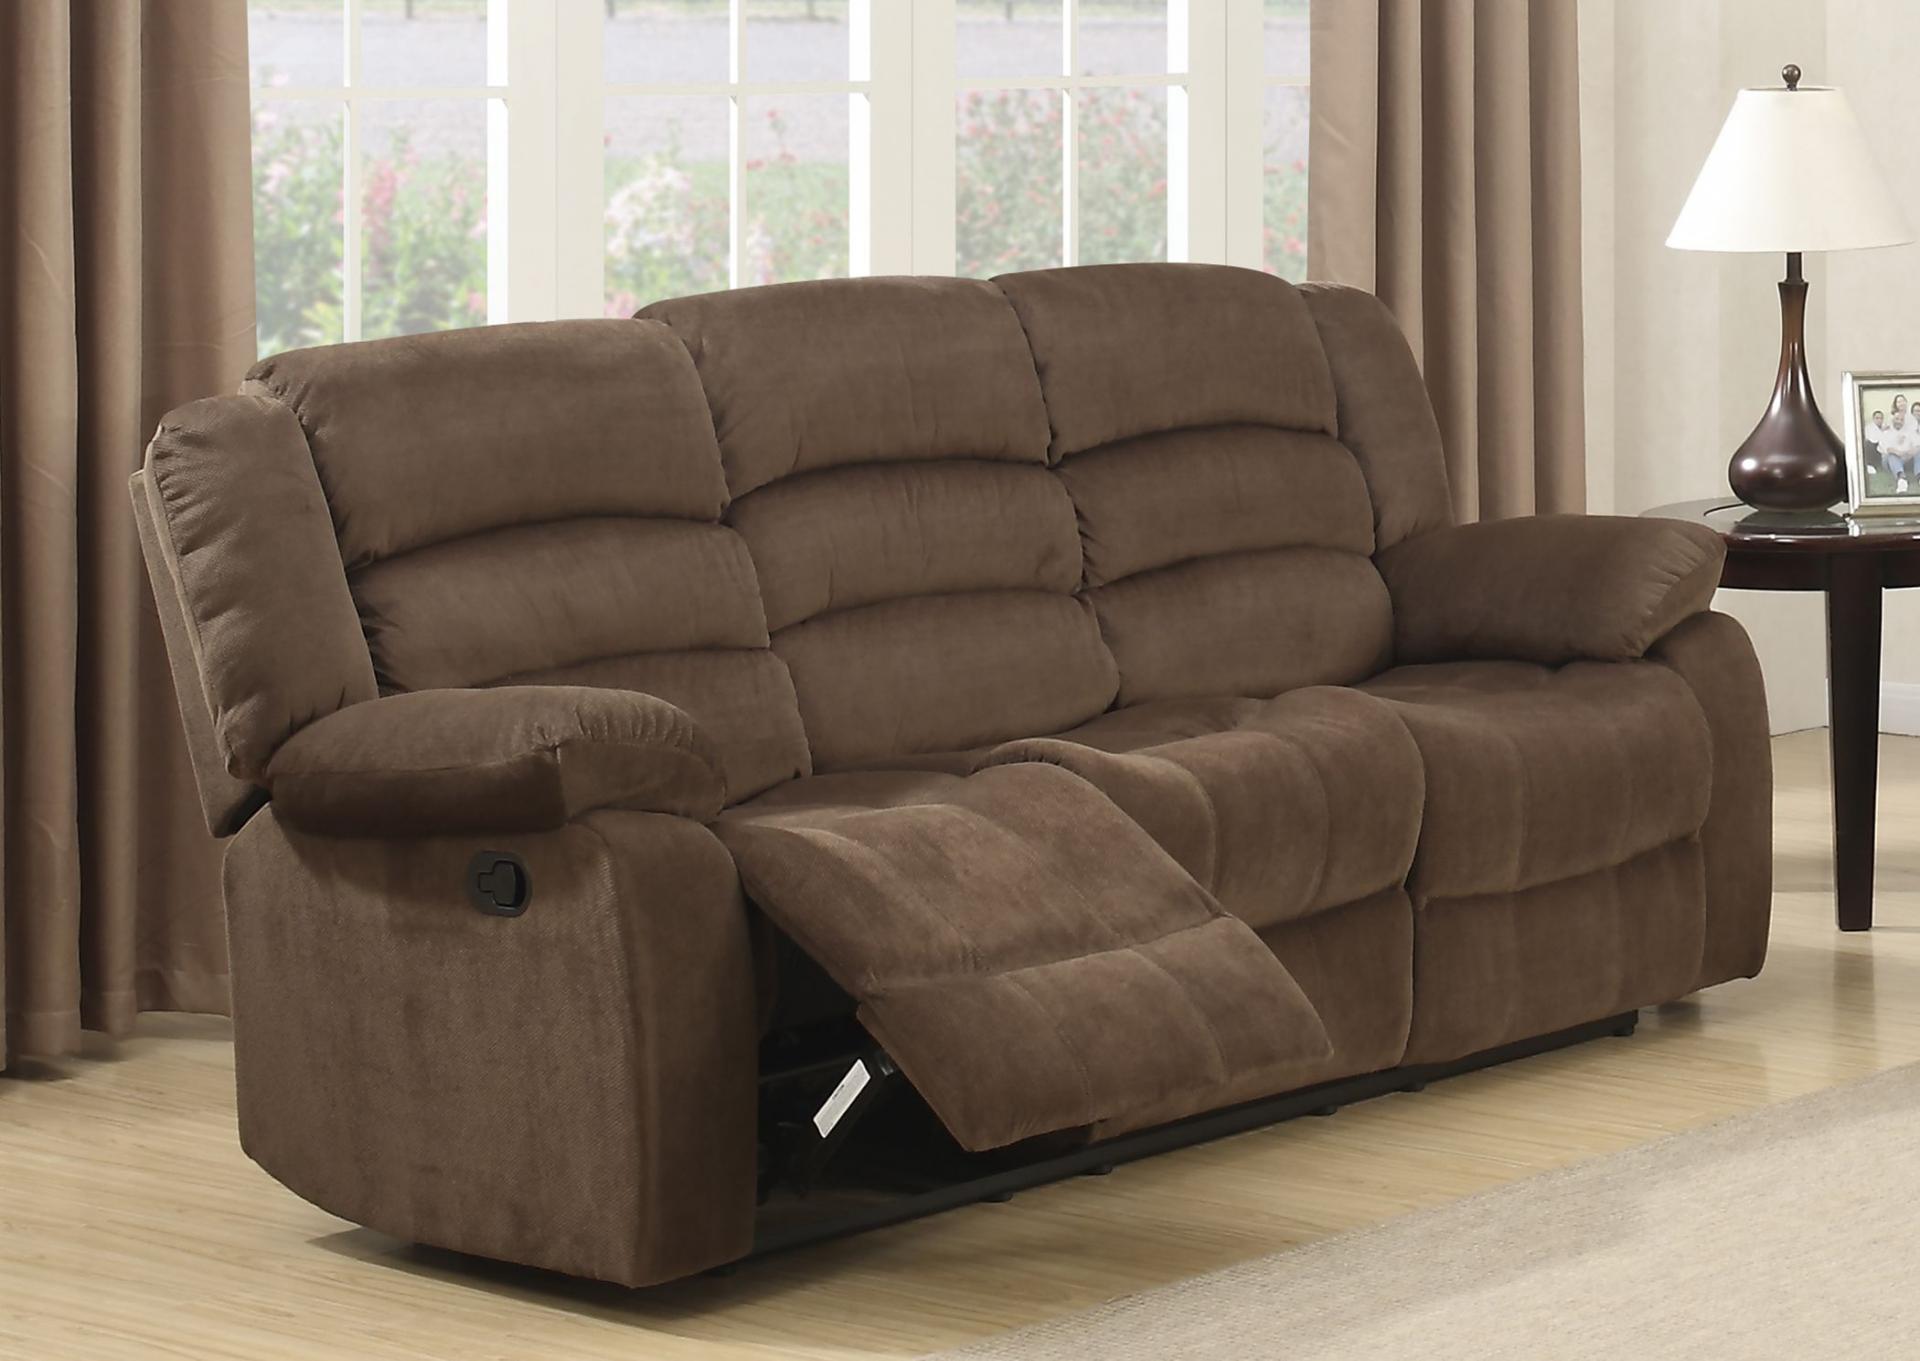 Dual Reclining Brown Fabric Sofa and Dual Reclining Love Seat with Pull Cables